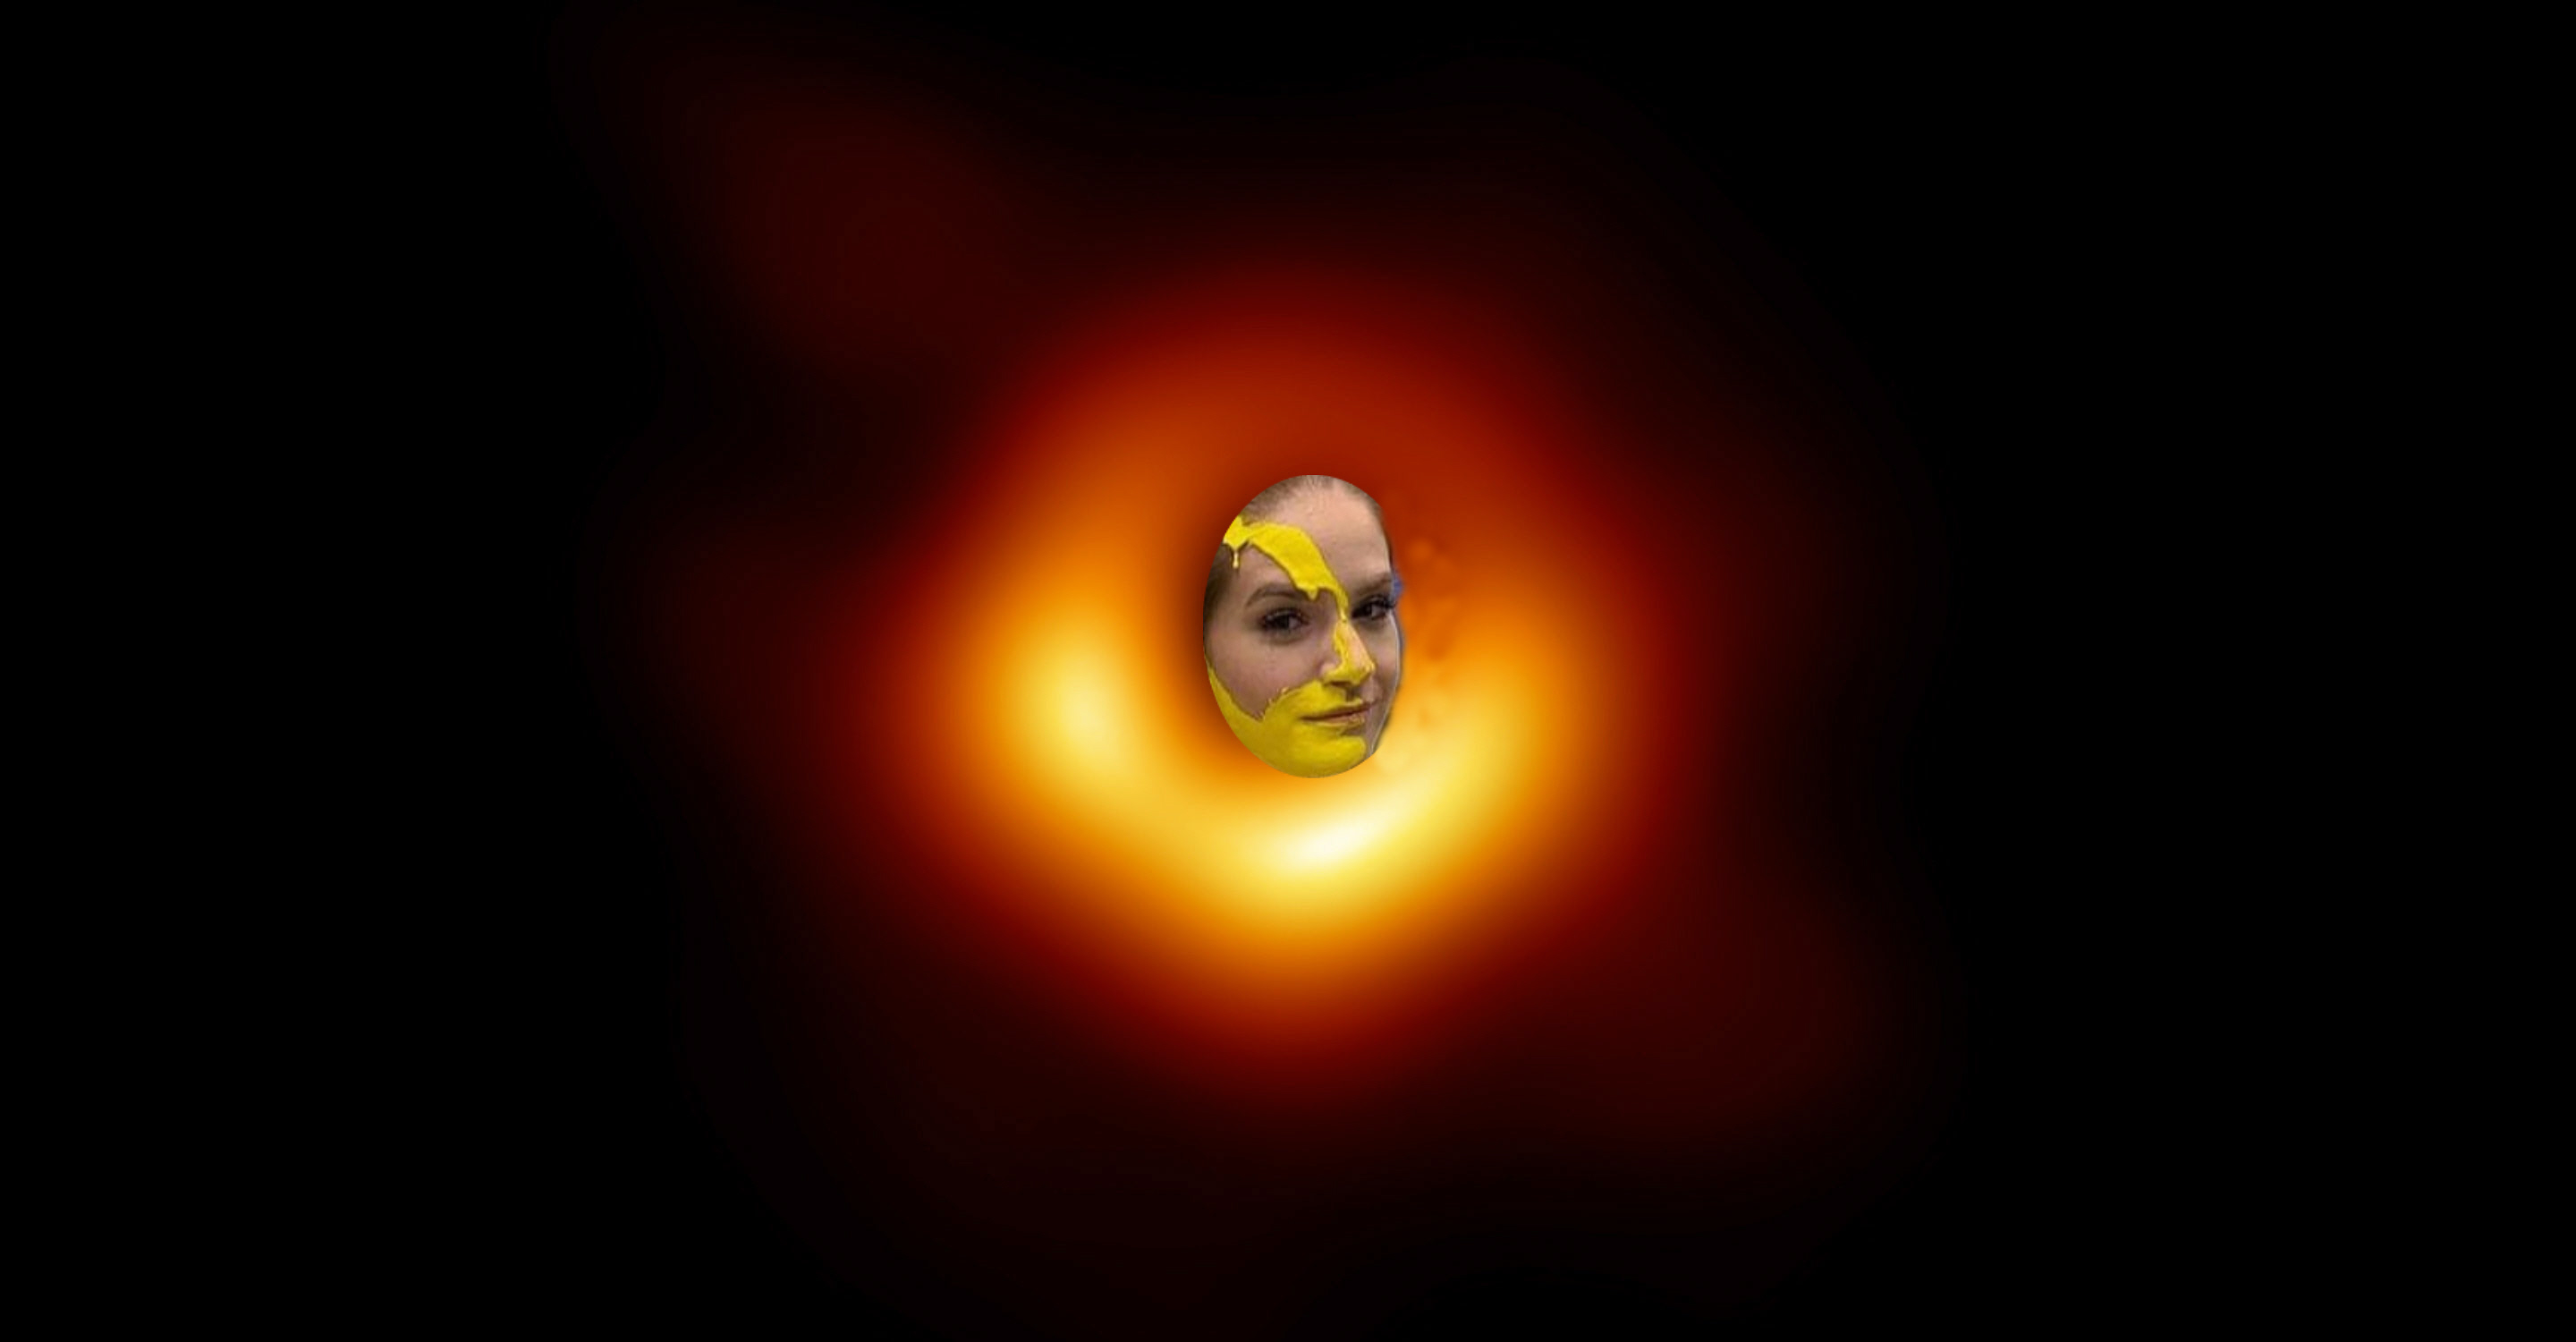 NASA has now published the first pictures of a white hole.